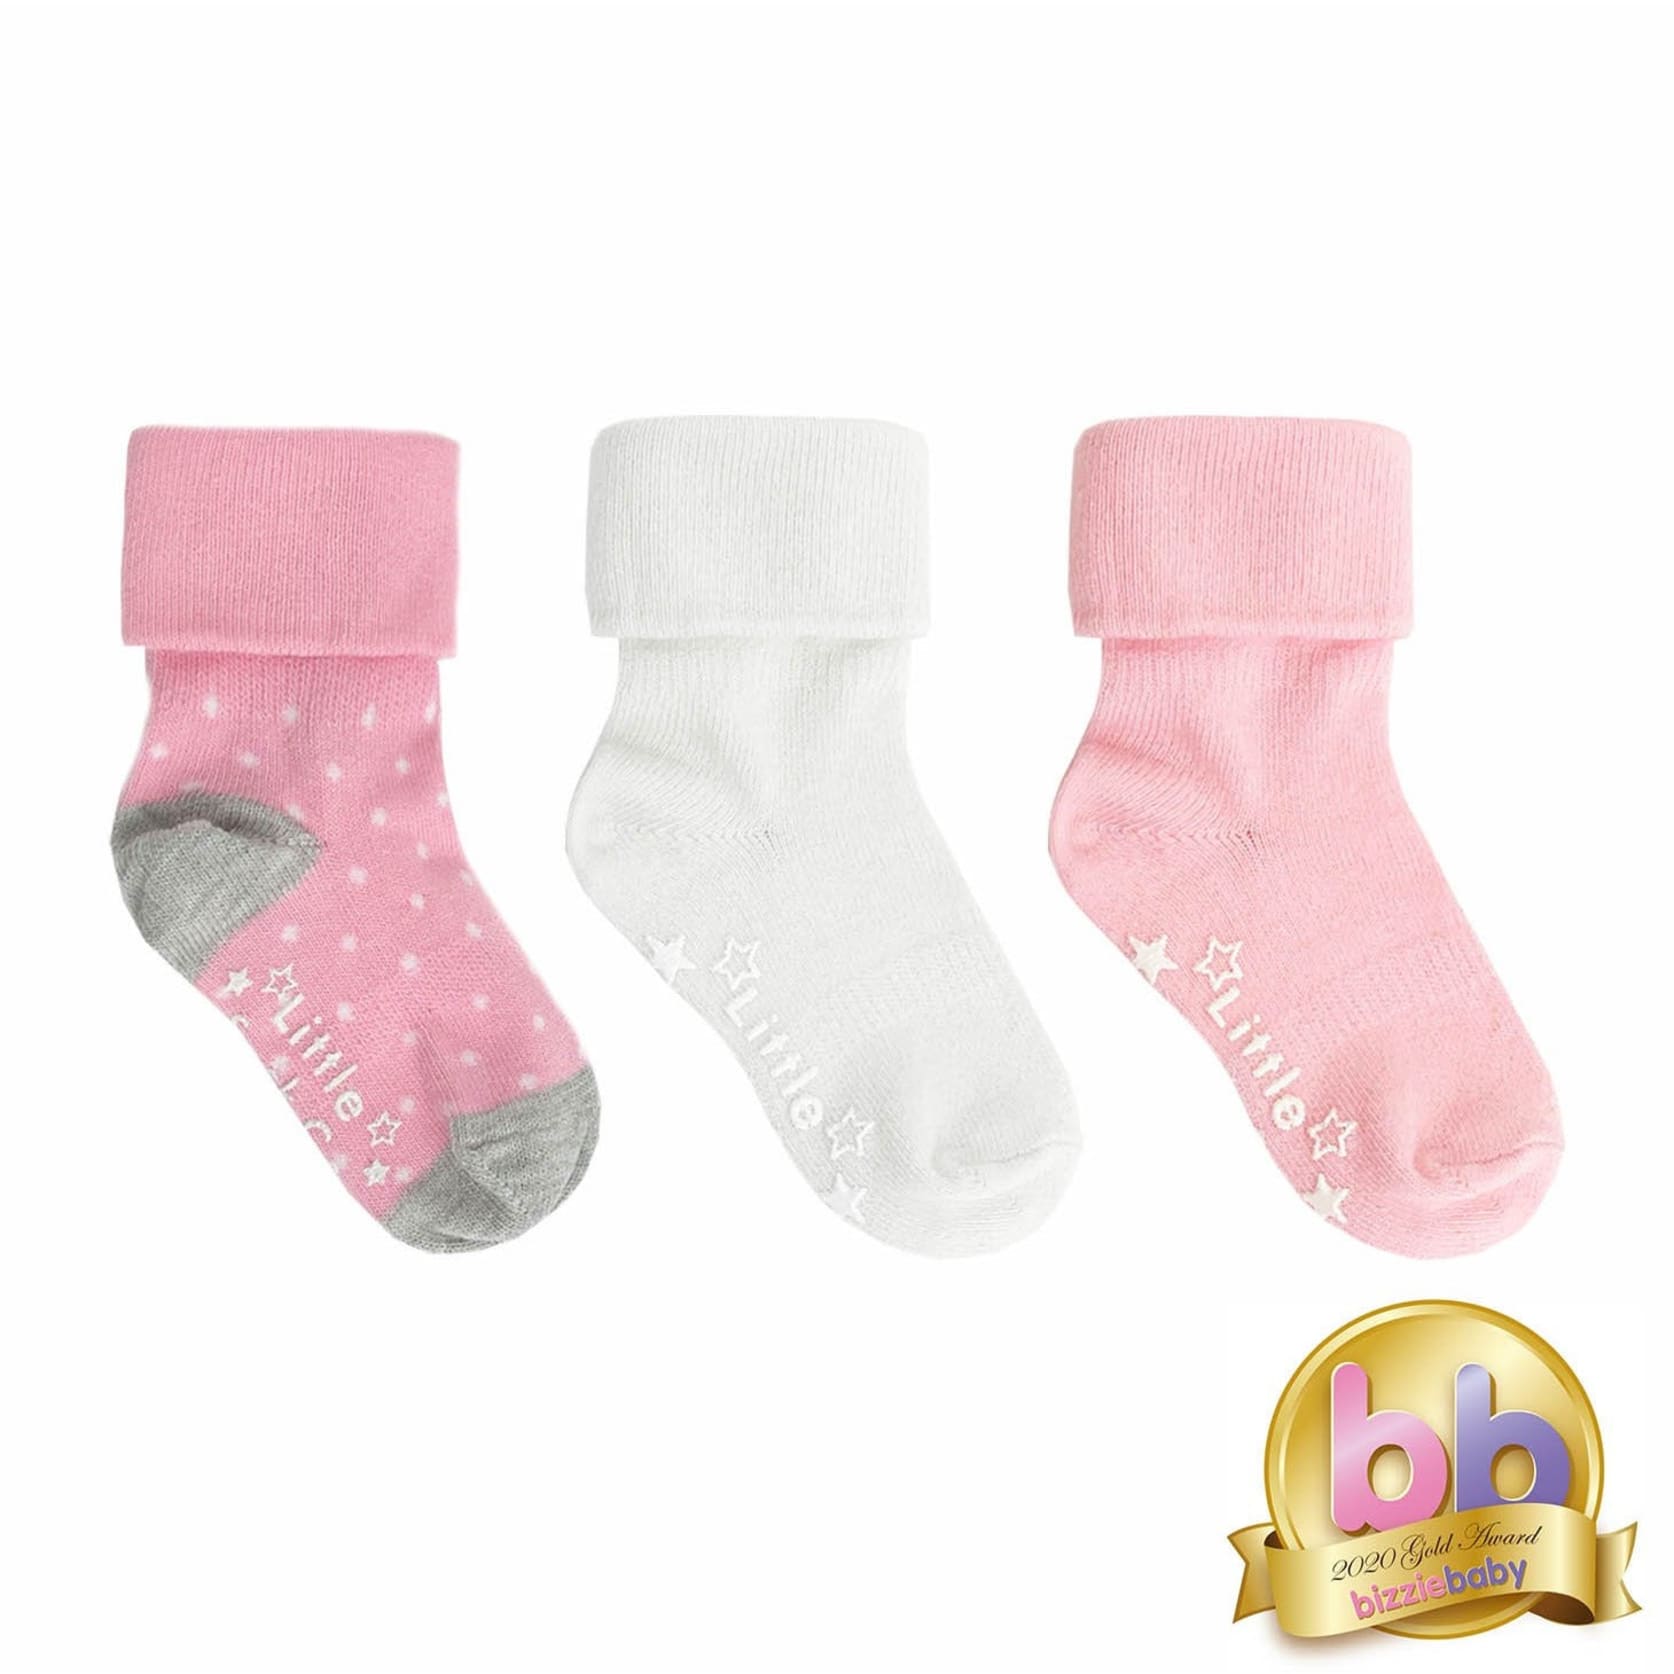 Non-Slip Stay on Baby and Toddler Socks - 3 Pack in Soft Pink & White